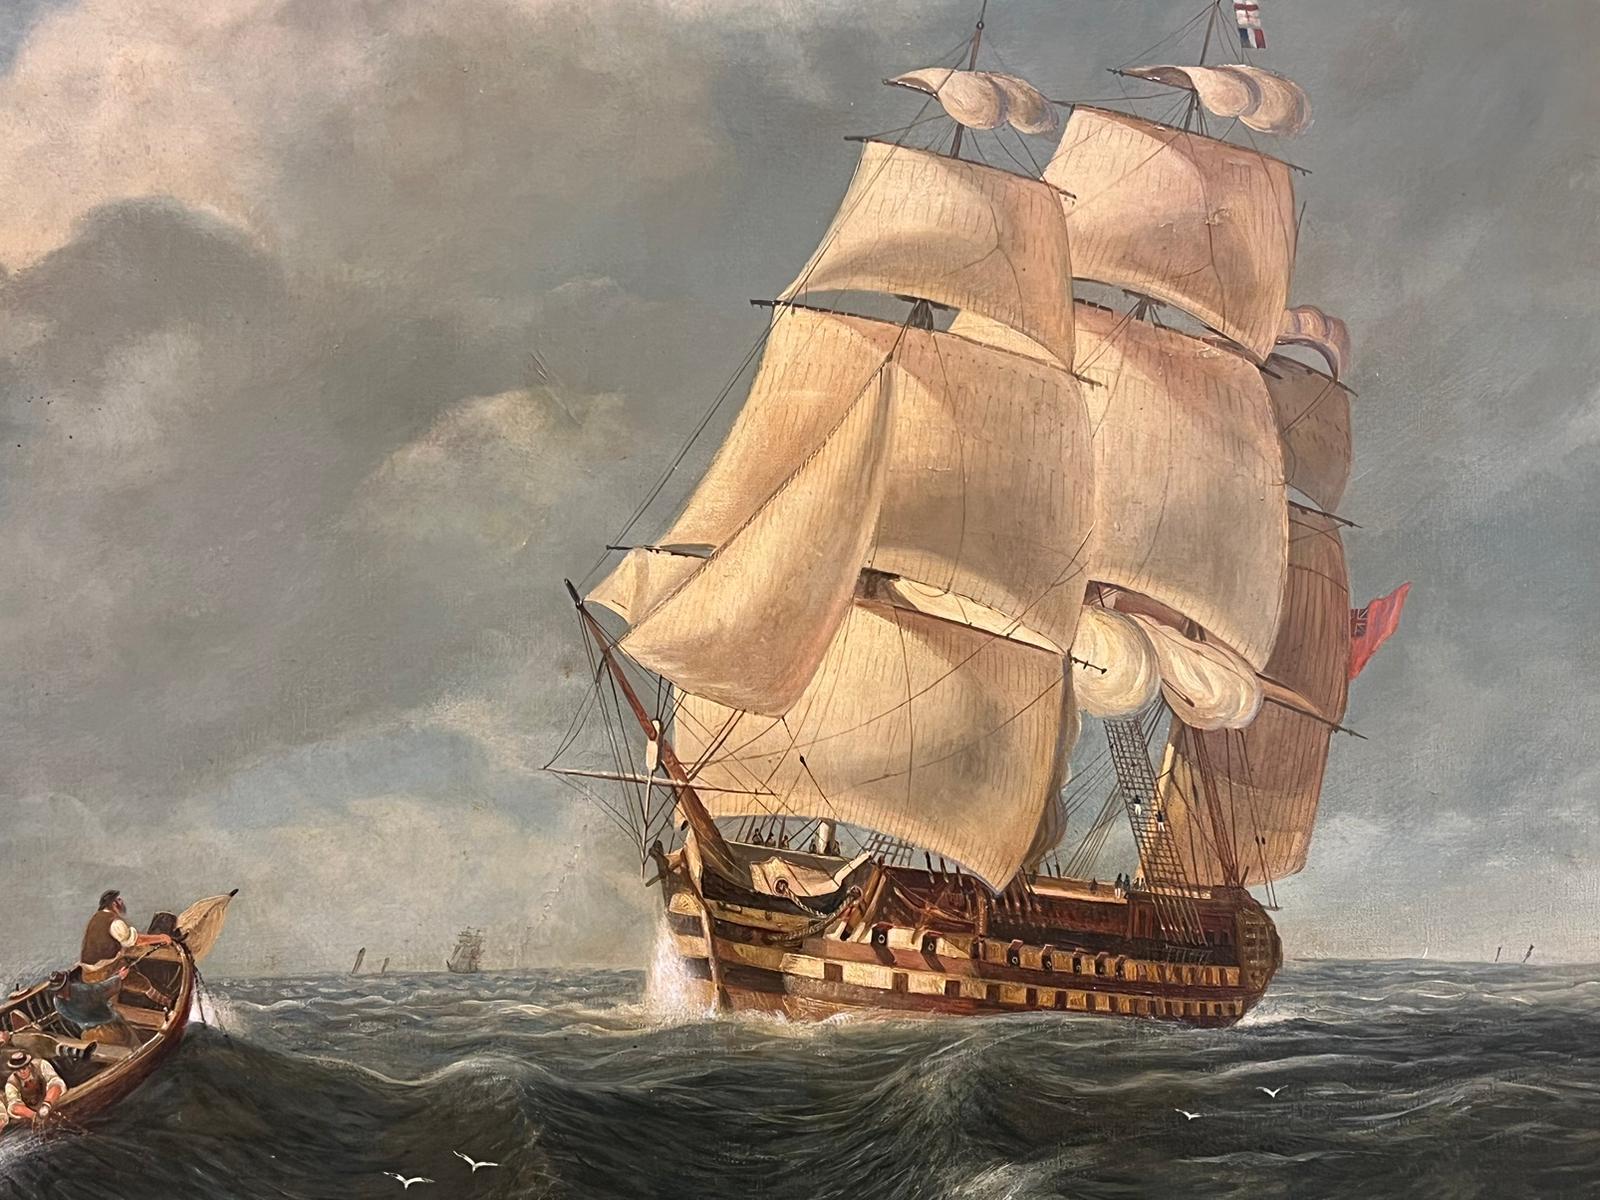 Sailing on High Seas
British School, 19th century
oil on canvas, framed
framed: 28 x 40 inches
canvas: 24 x 36 inches
provenance: private collection, UK
condition: very good and sound condition